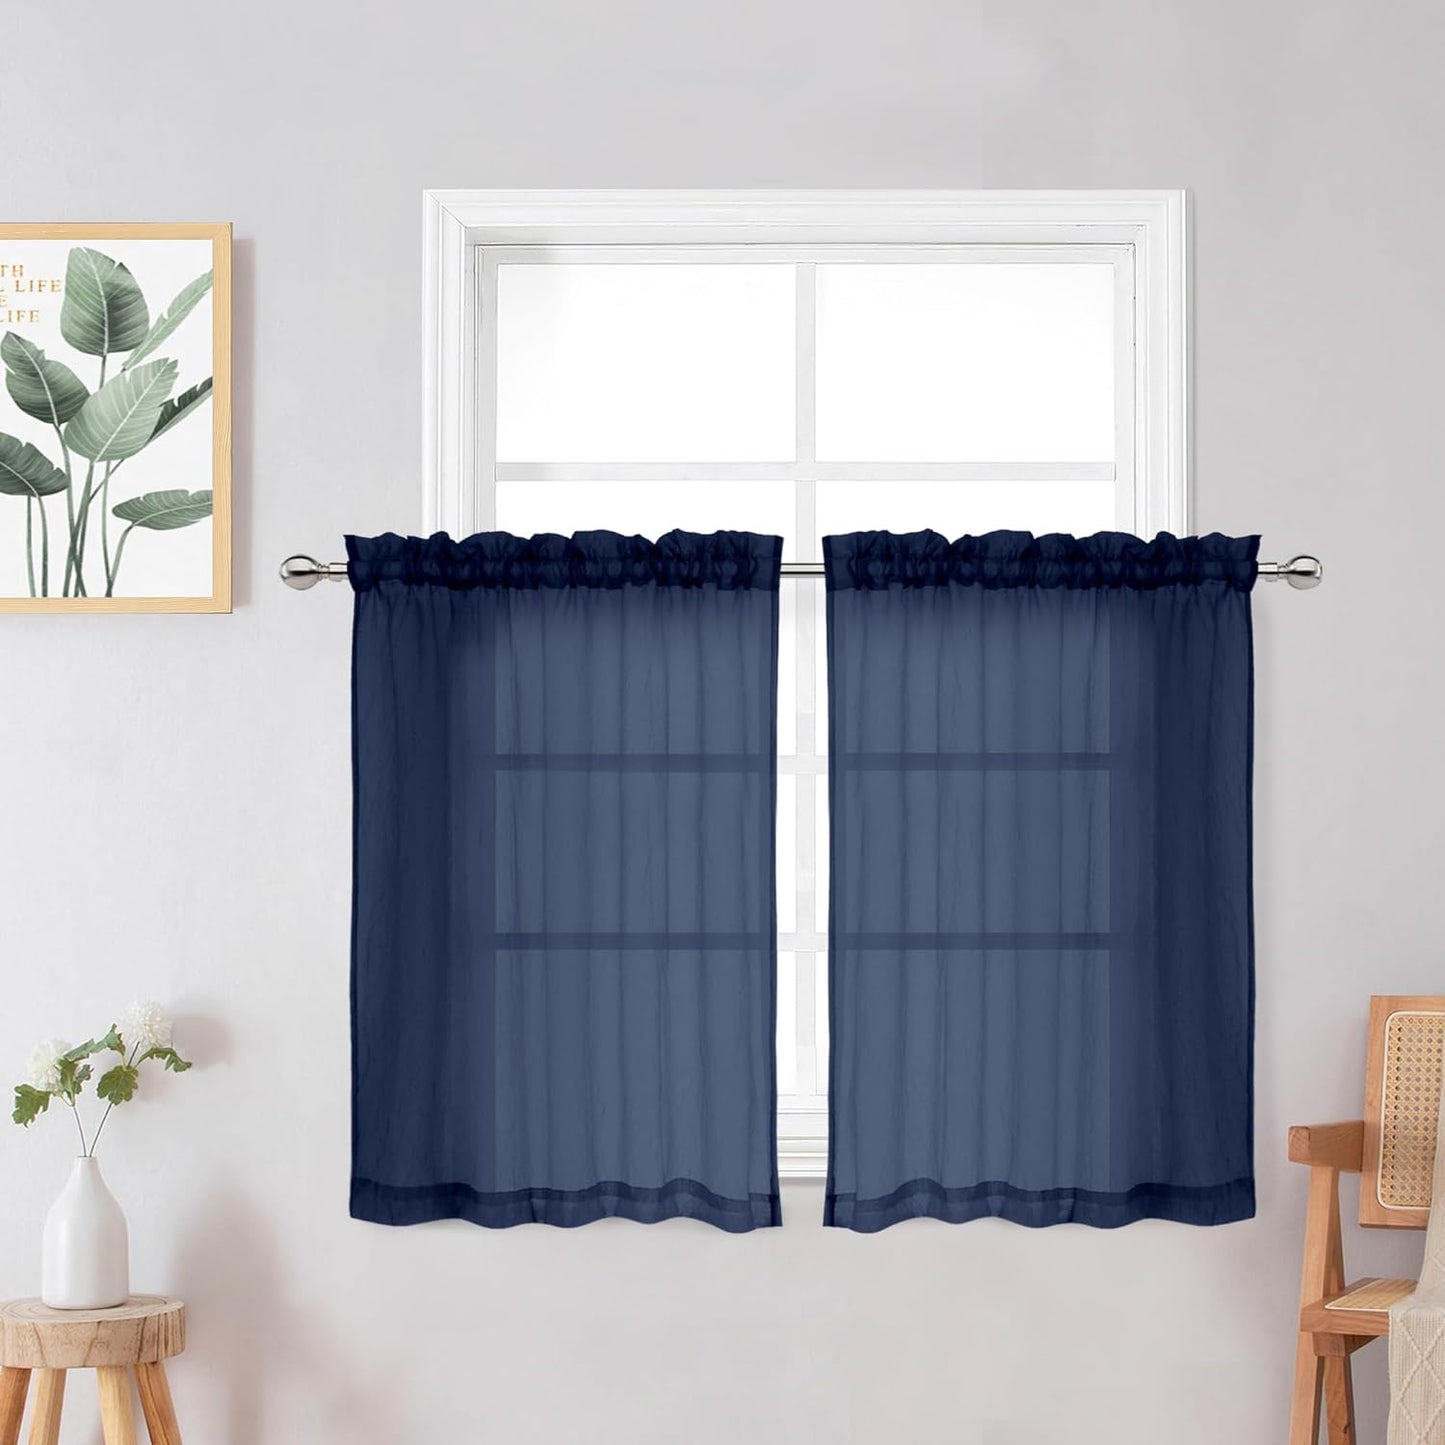 Crushed Sheer White Curtains 63 Inch Length 2 Panels, Light Filtering Solid Crinkle Voile Short Sheer Curtian for Bedroom Living Room, Each 42Wx63L Inches  Chyhomenyc Navy Blue 28 W X 24 L 